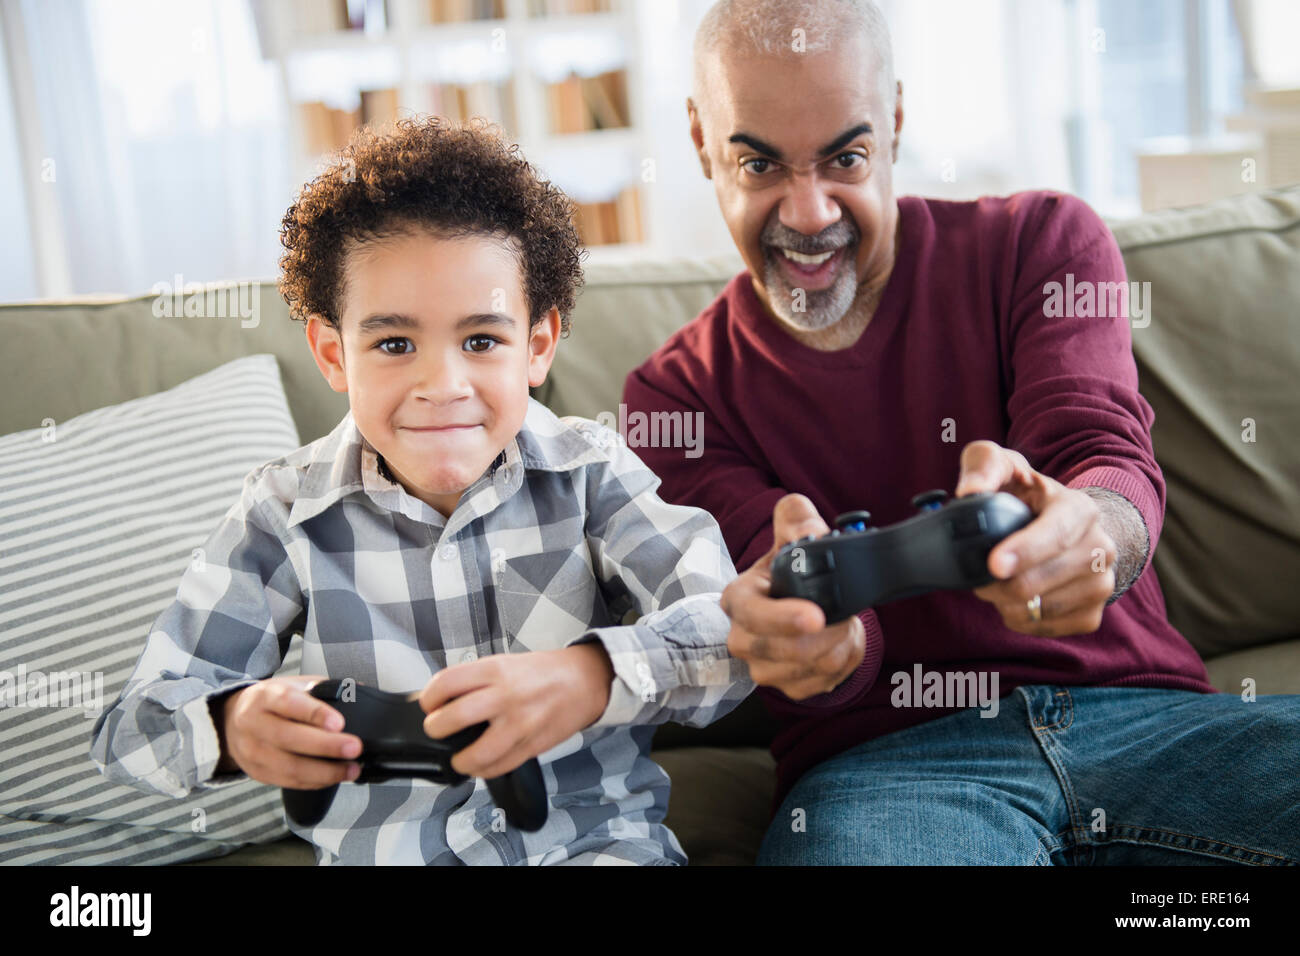 Mixed race grandfather and grandson playing video games Stock Photo